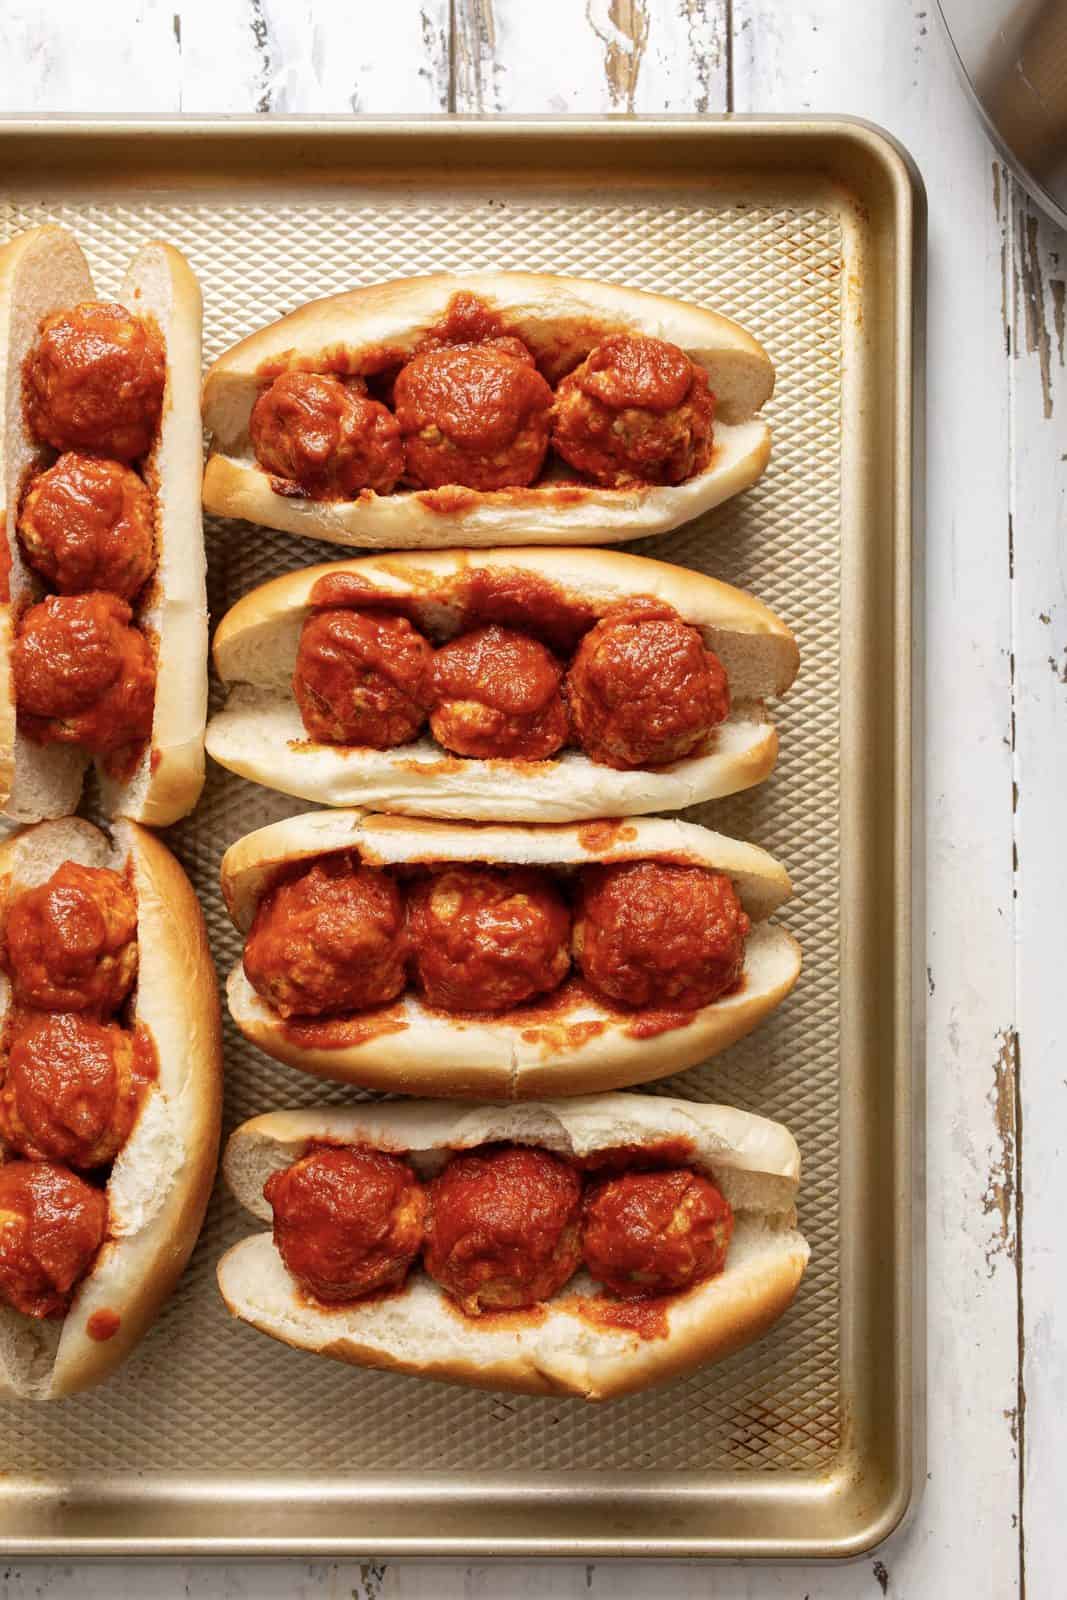 Meatballs placed on sub buns on baking sheet.